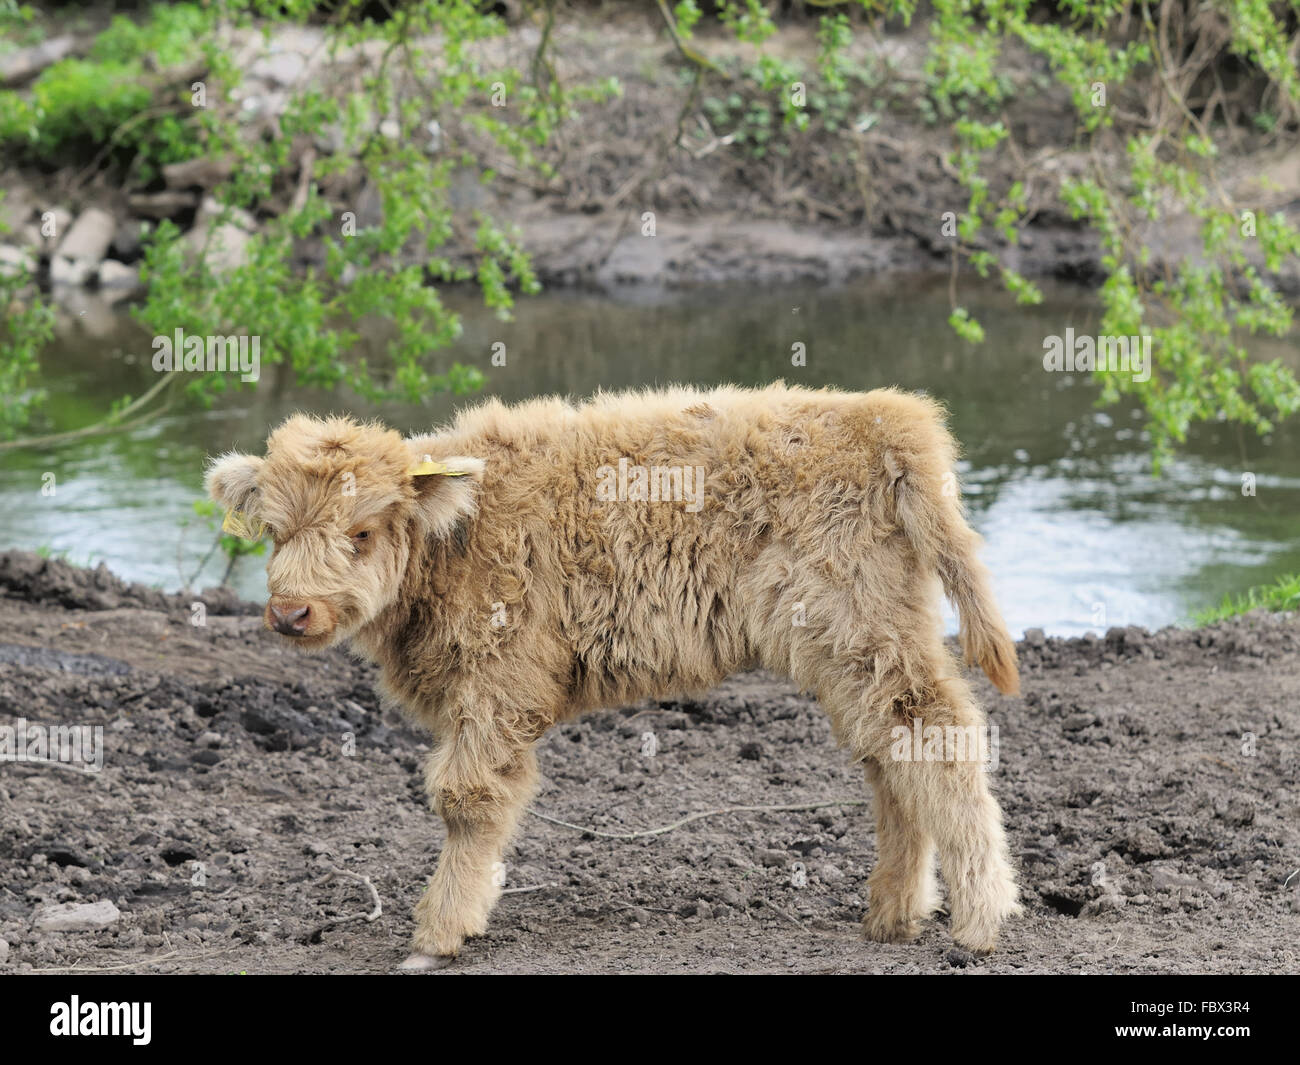 heck cattle Stock Photo